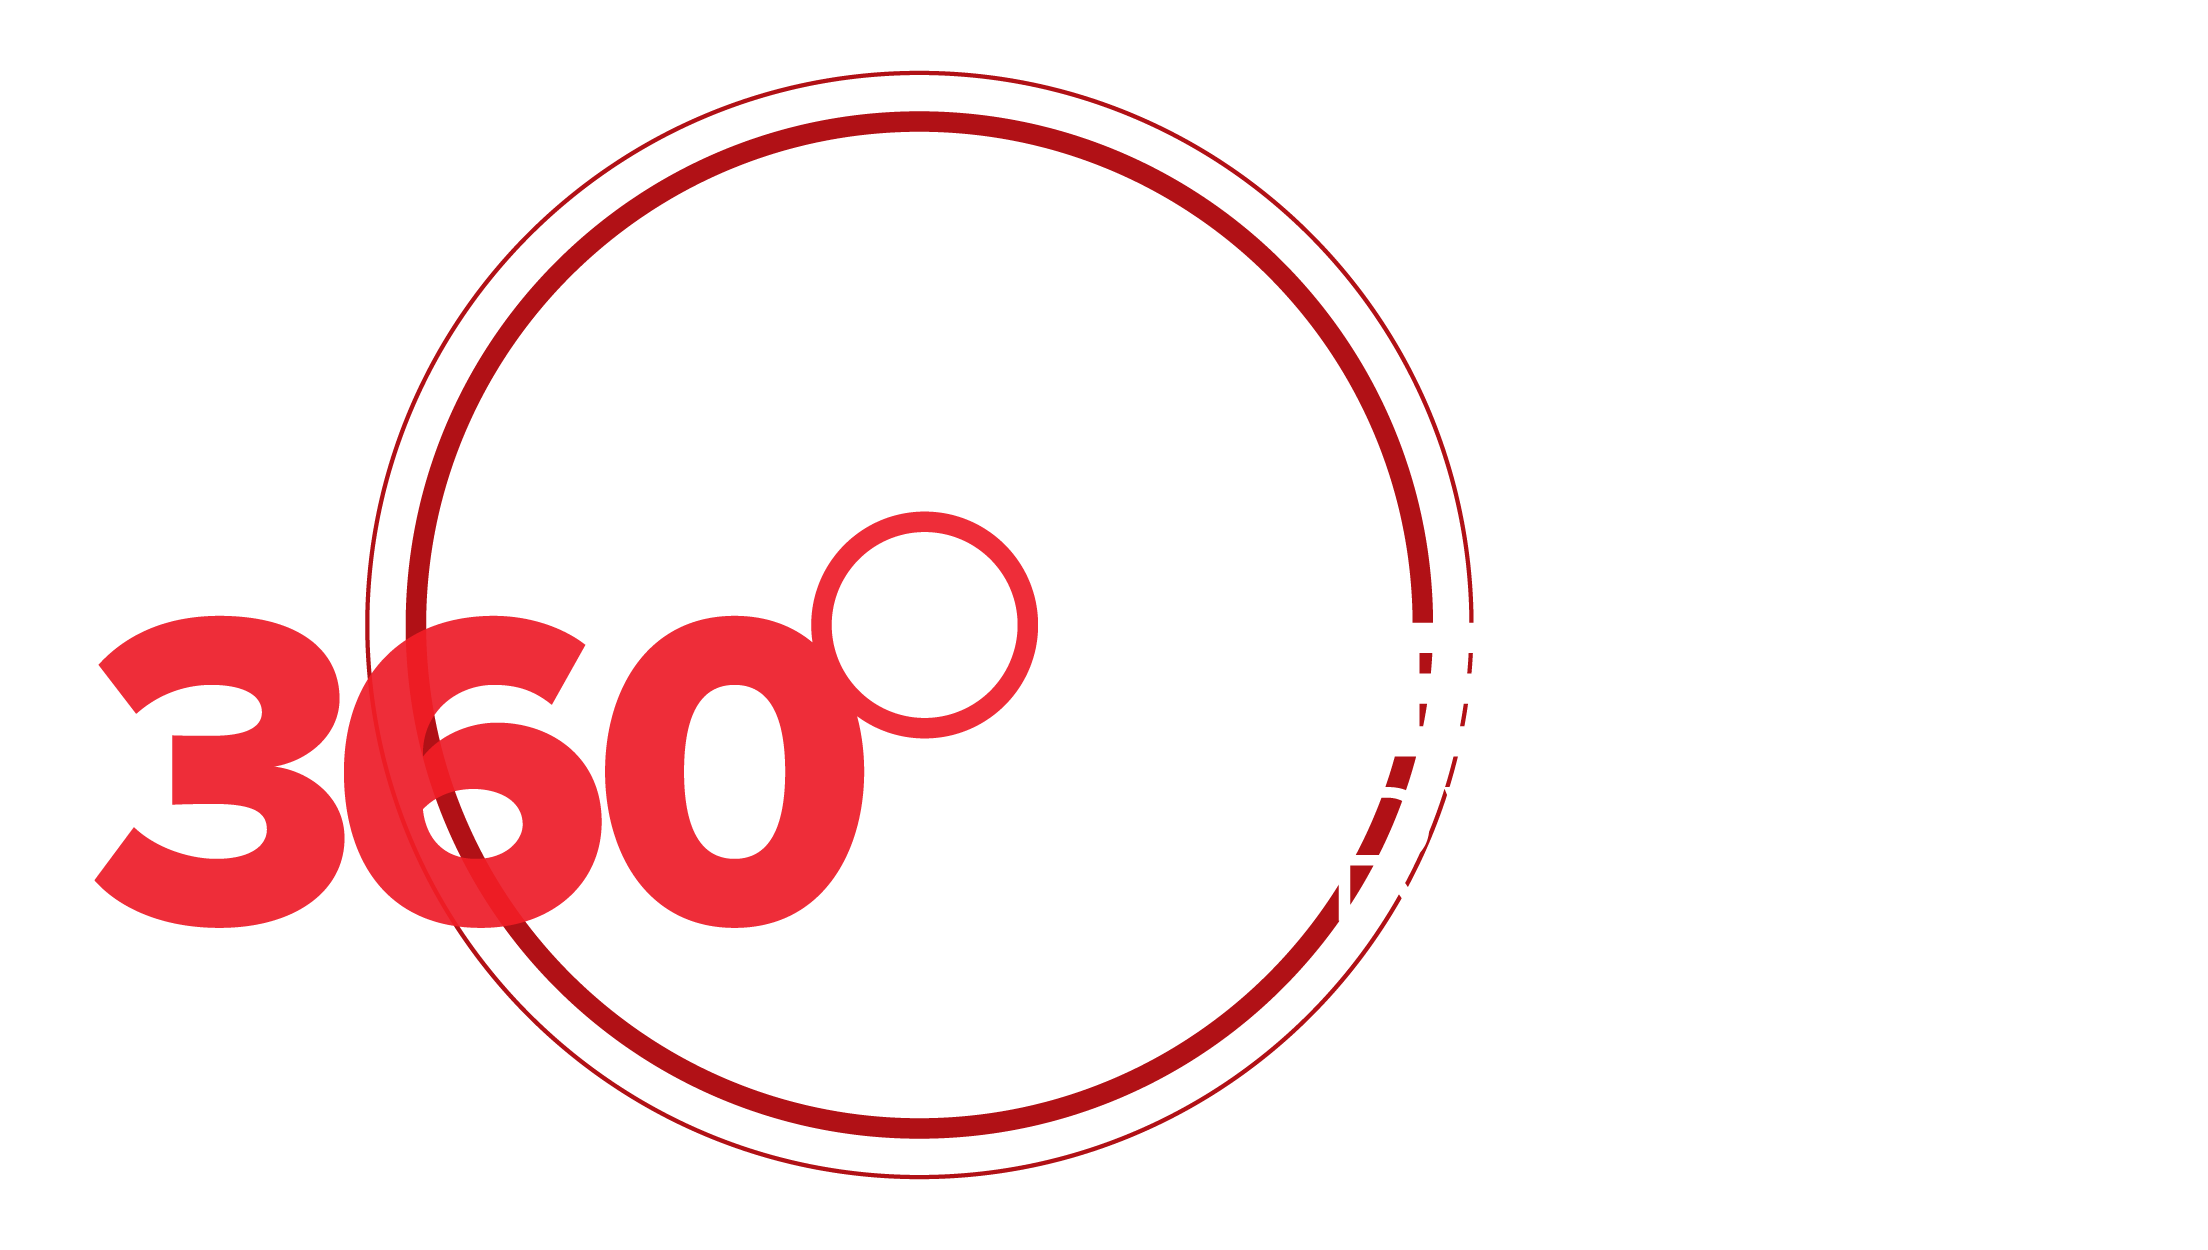 360 IT Lifecycle Services